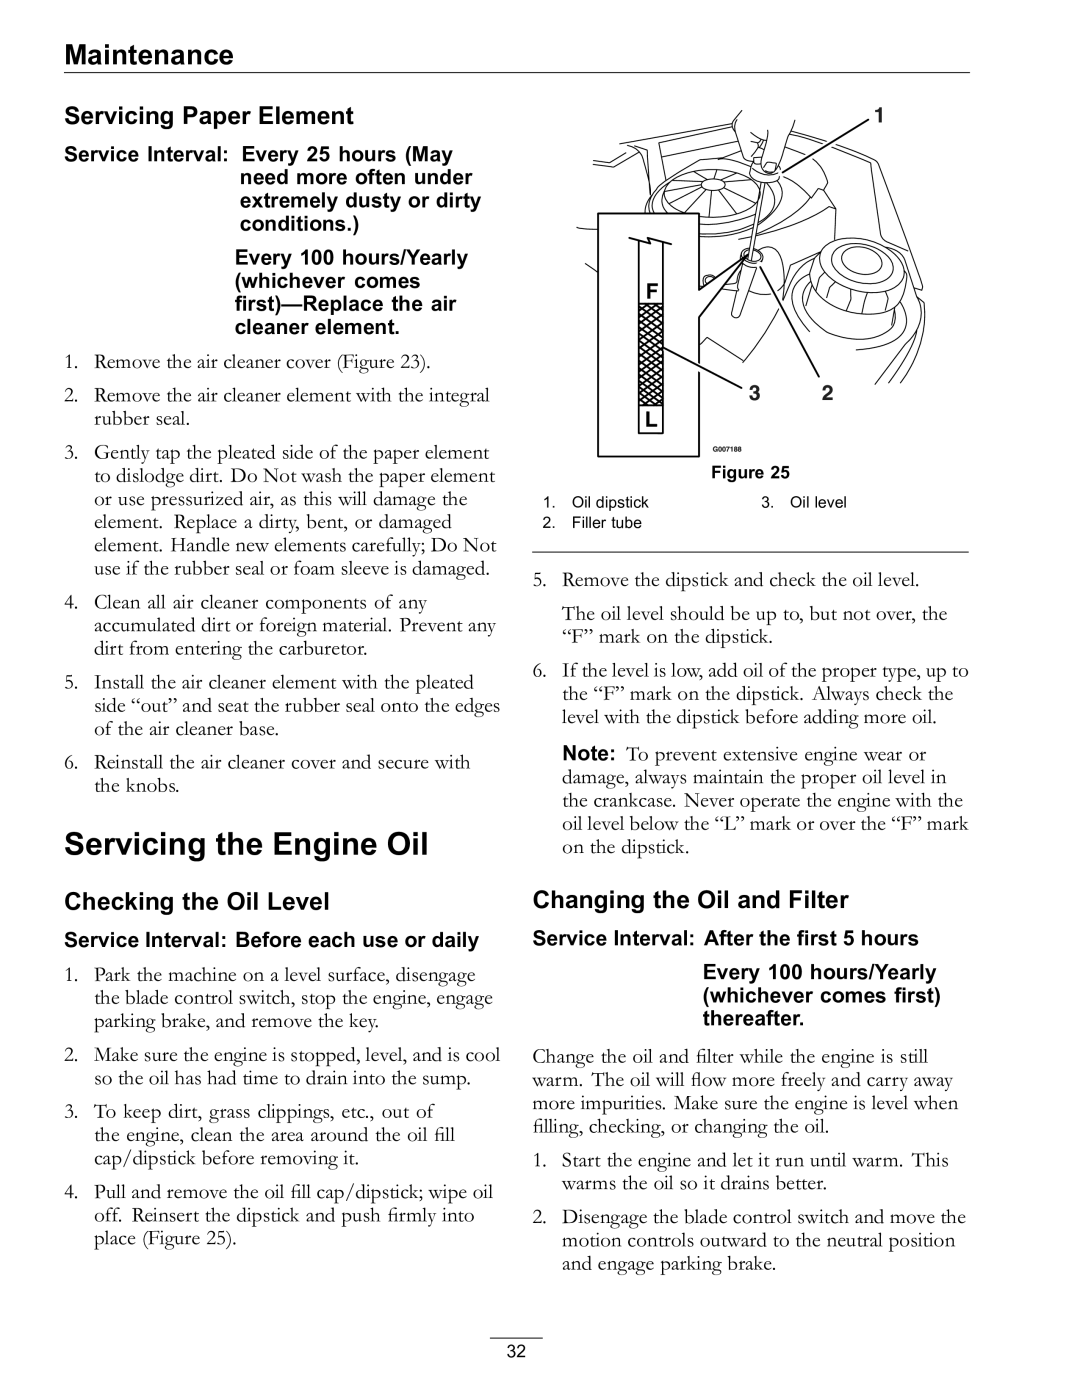 Exmark Lawn Mower Servicing the Engine Oil, Servicing Paper Element, Checking the Oil Level, Changing the Oil and Filter 